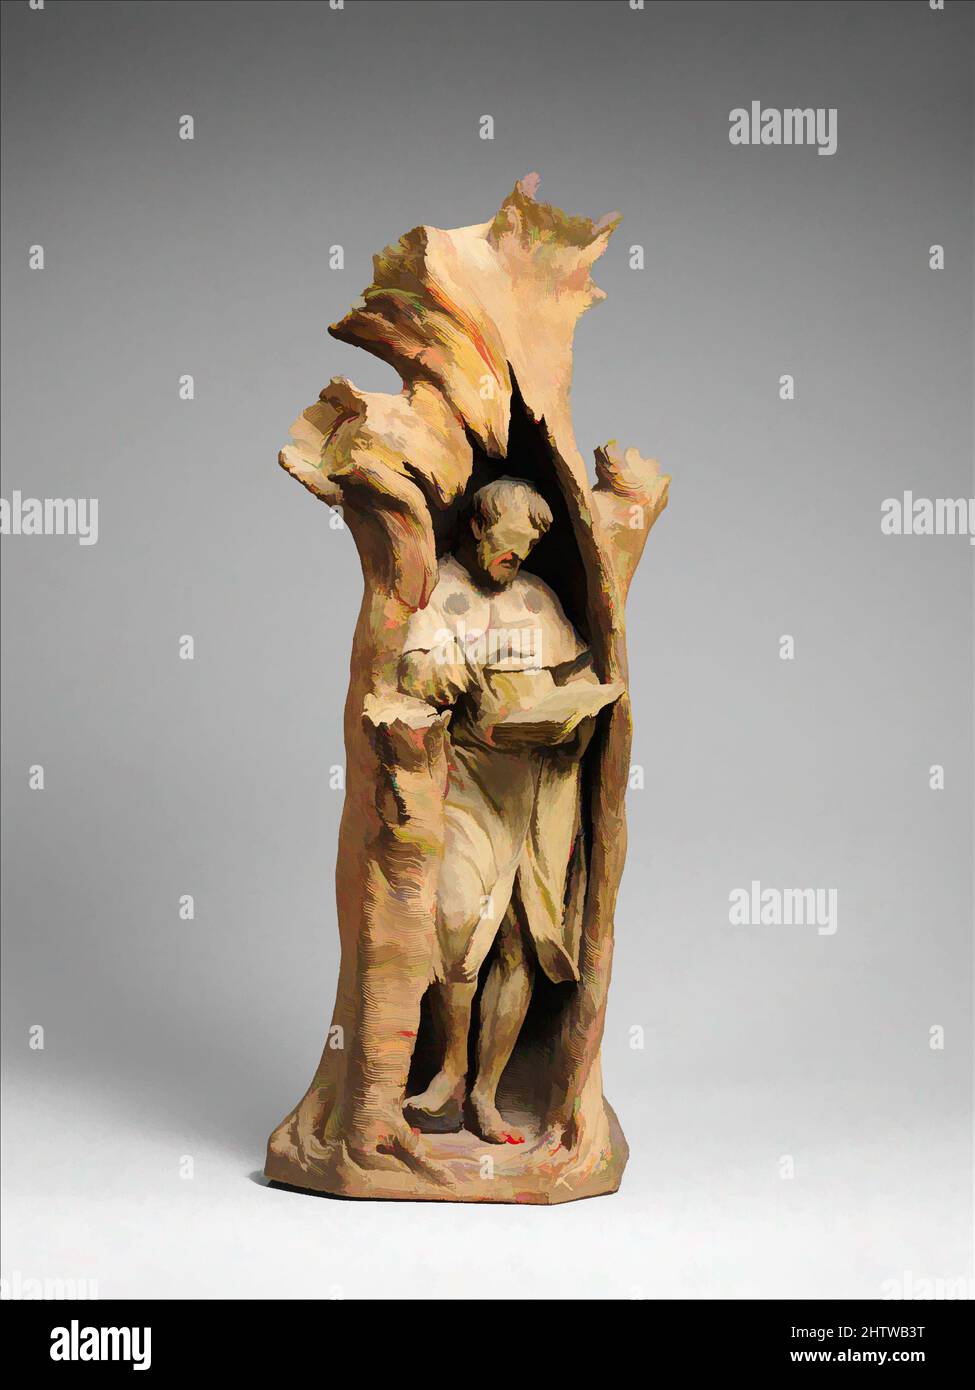 Art inspired by Emperor Henry IV at Canossa, ca. 1770–75, Italian, Bologna, Terracotta, Overall (confirmed): H. 23 7/8 x W. 9 1/4 x D. 7 1/8 in. (60.6 x 23.5 x 18.1 cm), Sculpture, Pope Saint Gregory VII excommunicated Emperor Henry IV for his interference in the appointment of clergy, Classic works modernized by Artotop with a splash of modernity. Shapes, color and value, eye-catching visual impact on art. Emotions through freedom of artworks in a contemporary way. A timeless message pursuing a wildly creative new direction. Artists turning to the digital medium and creating the Artotop NFT Stock Photo